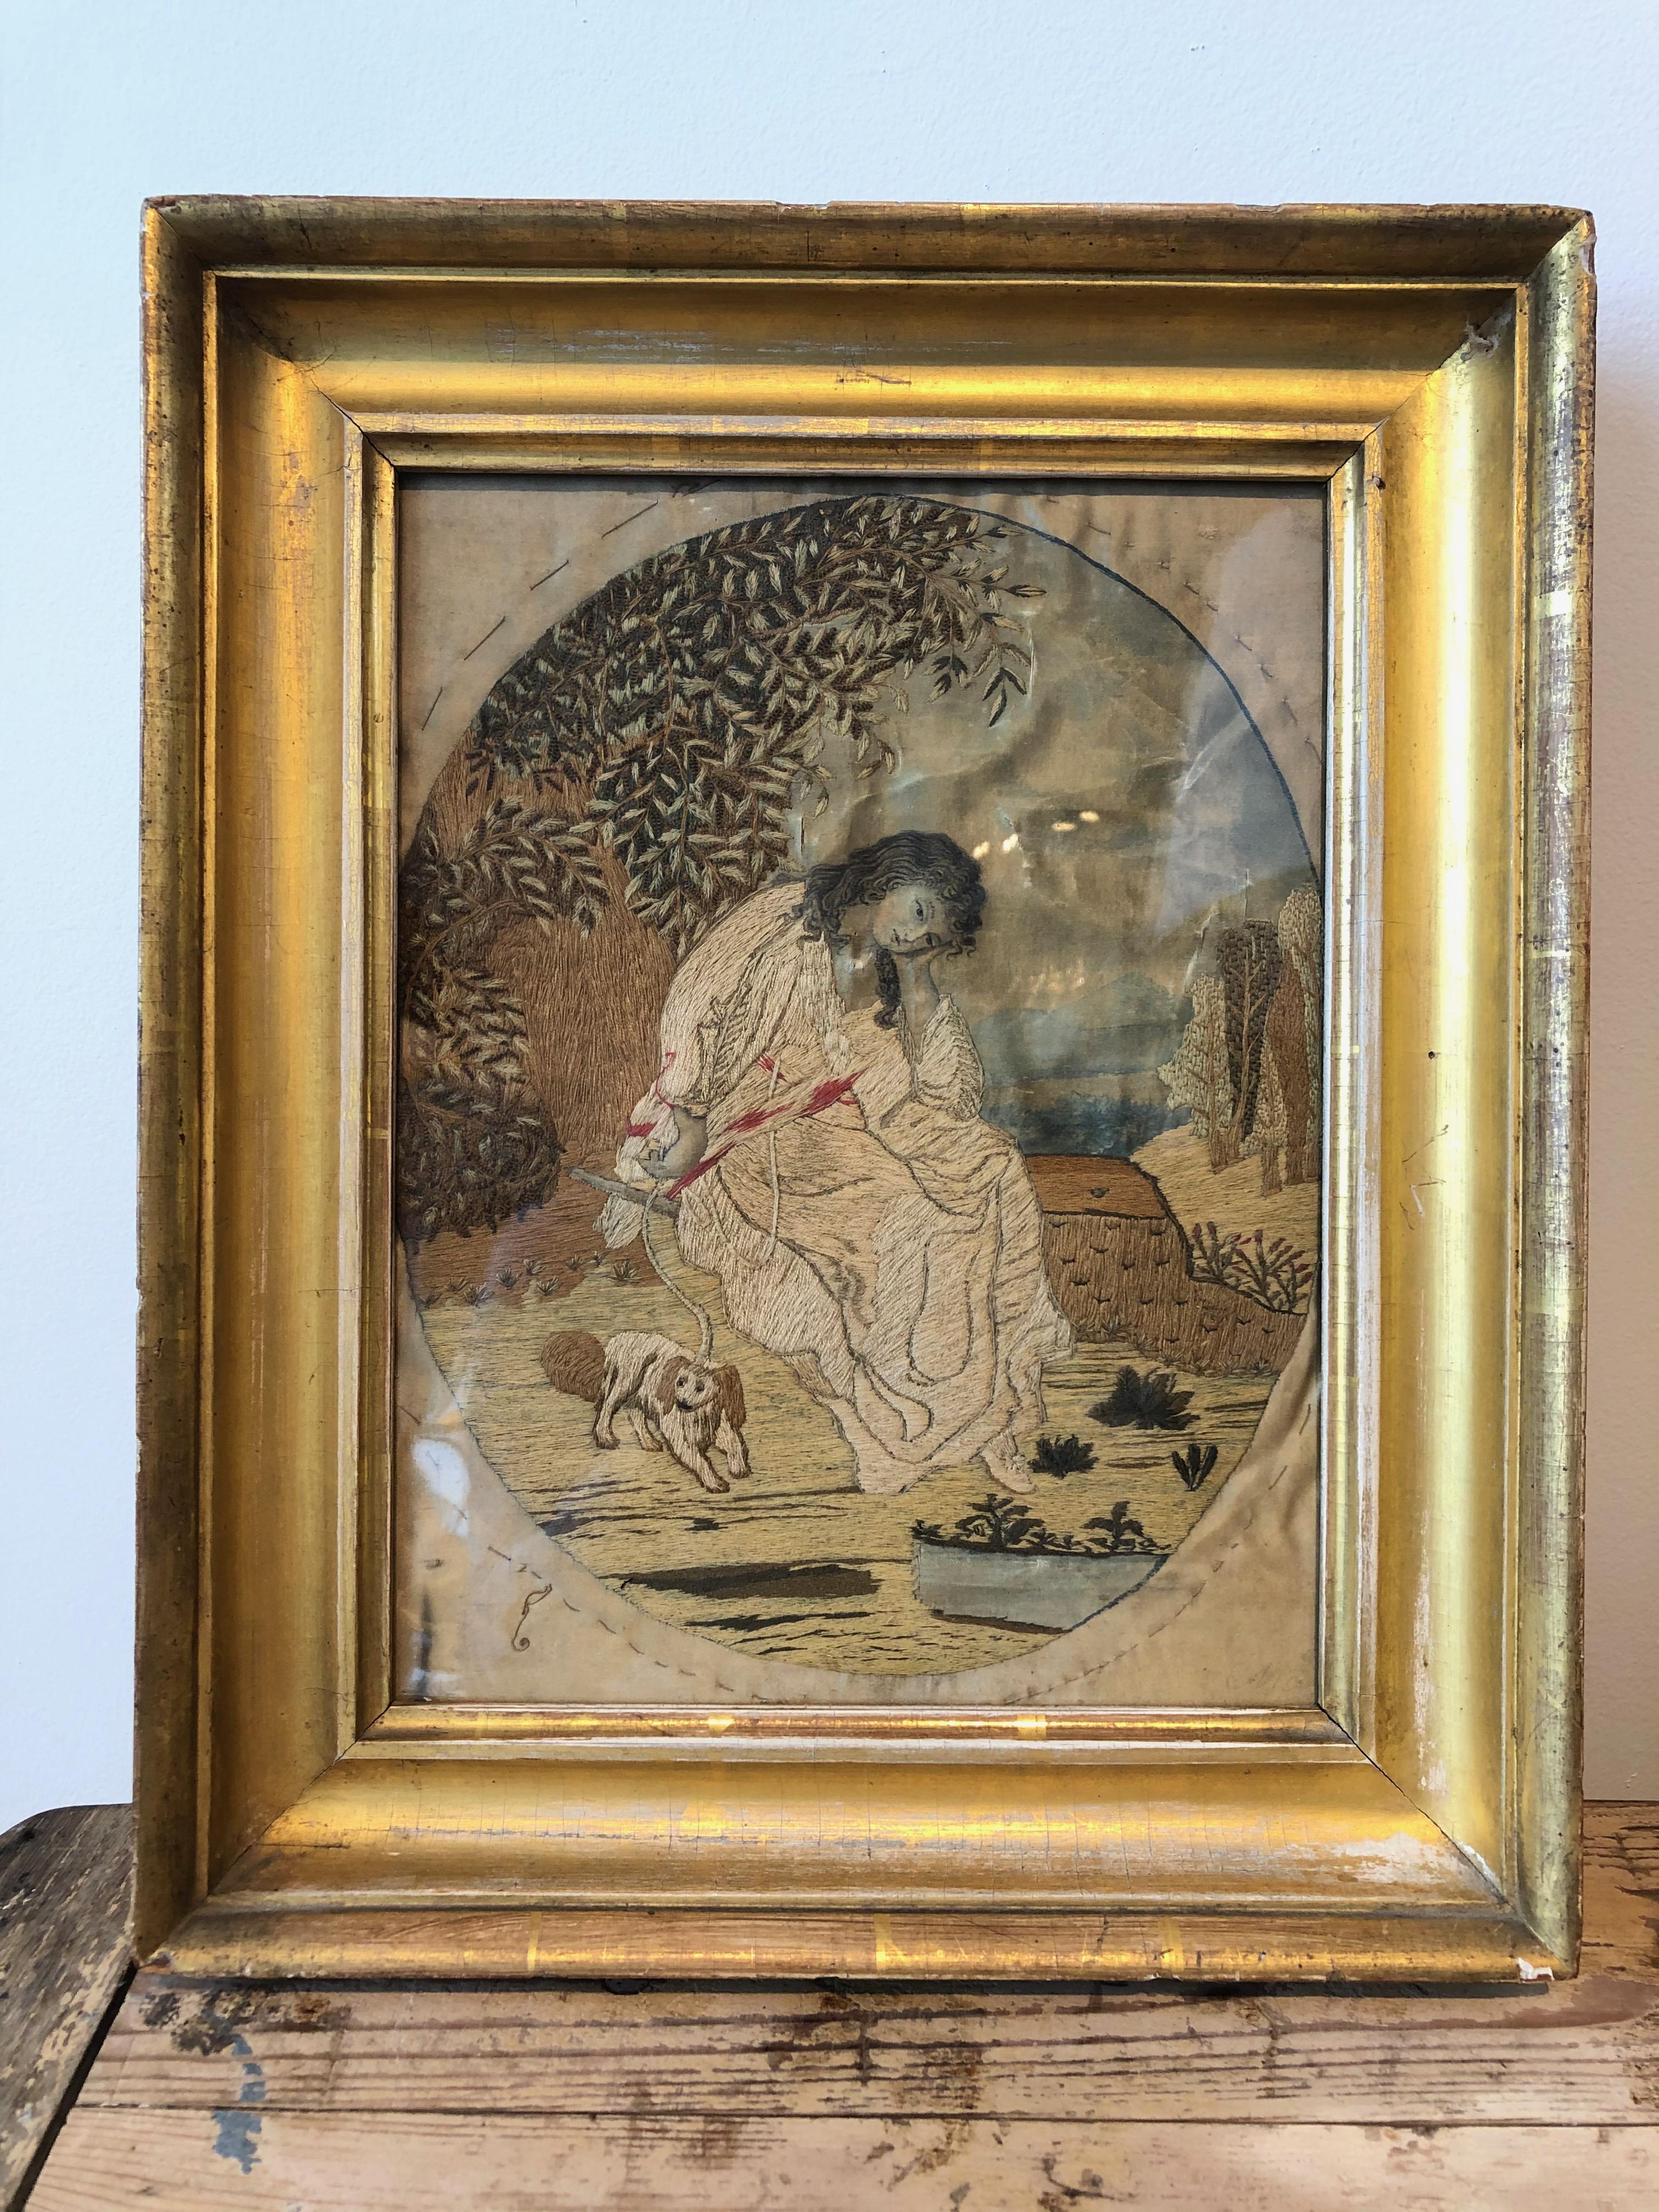 French silk needlepoint of girl and dog in gilded frame.